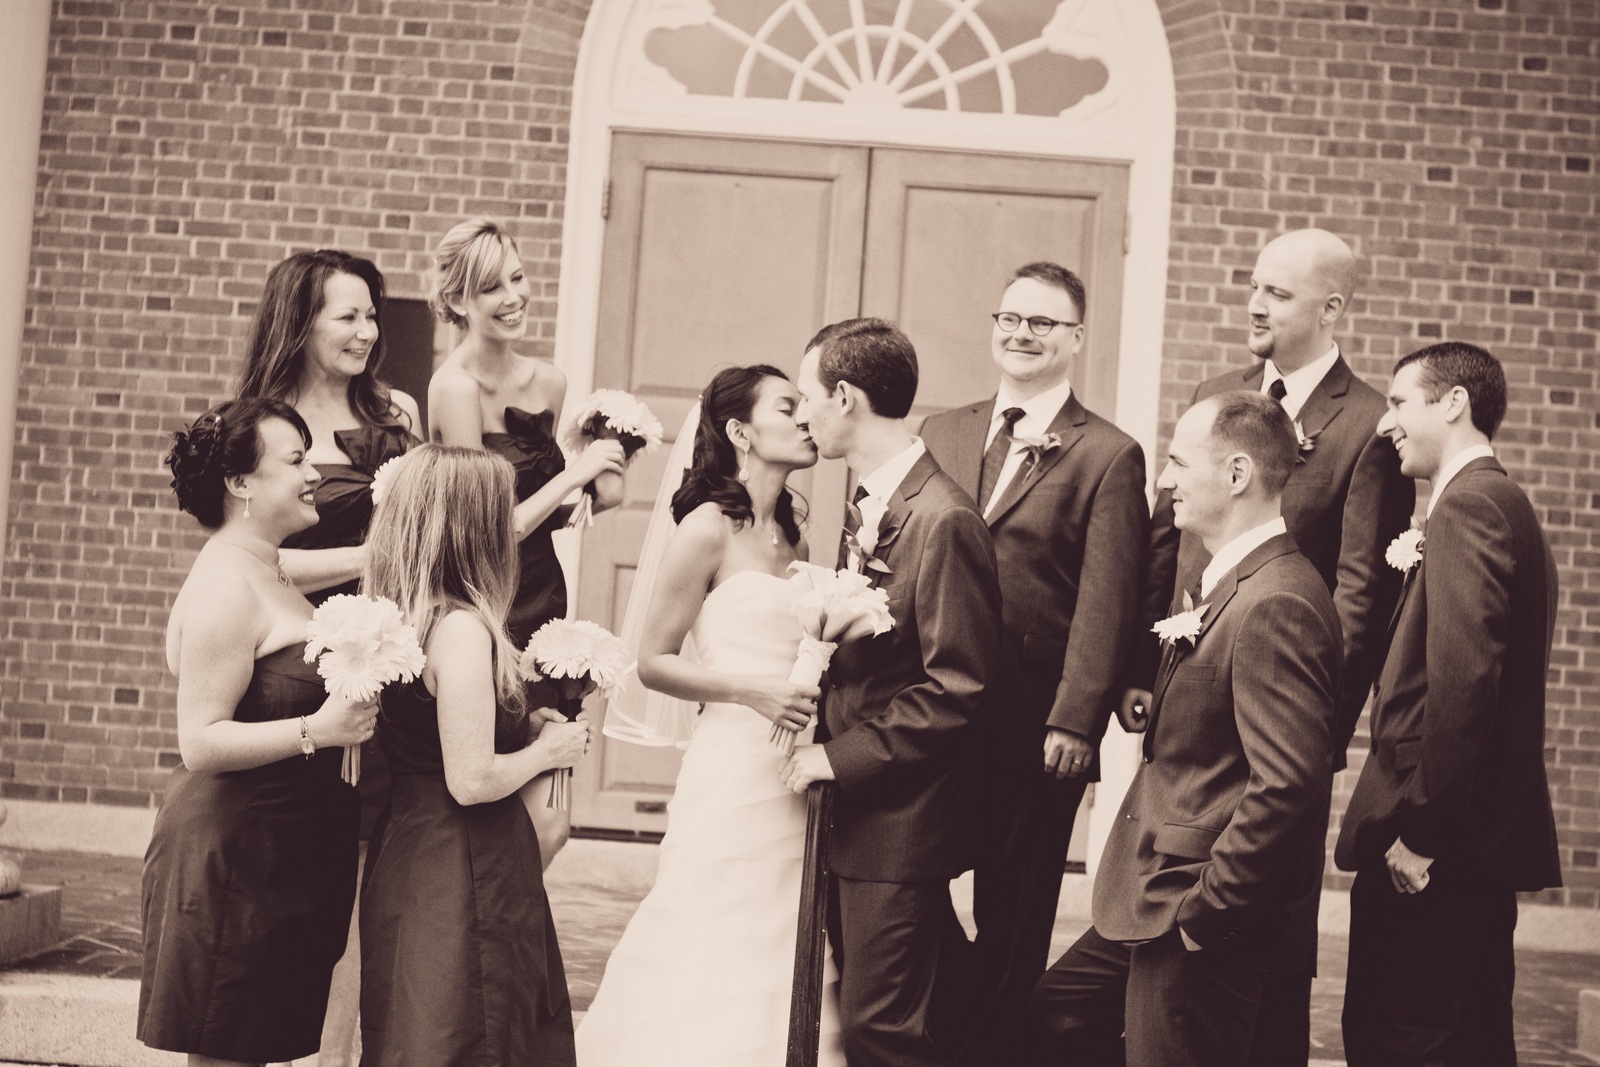 Judd-Rittler Wedding Party - Photo Courtesy of Brian Samuels Photography